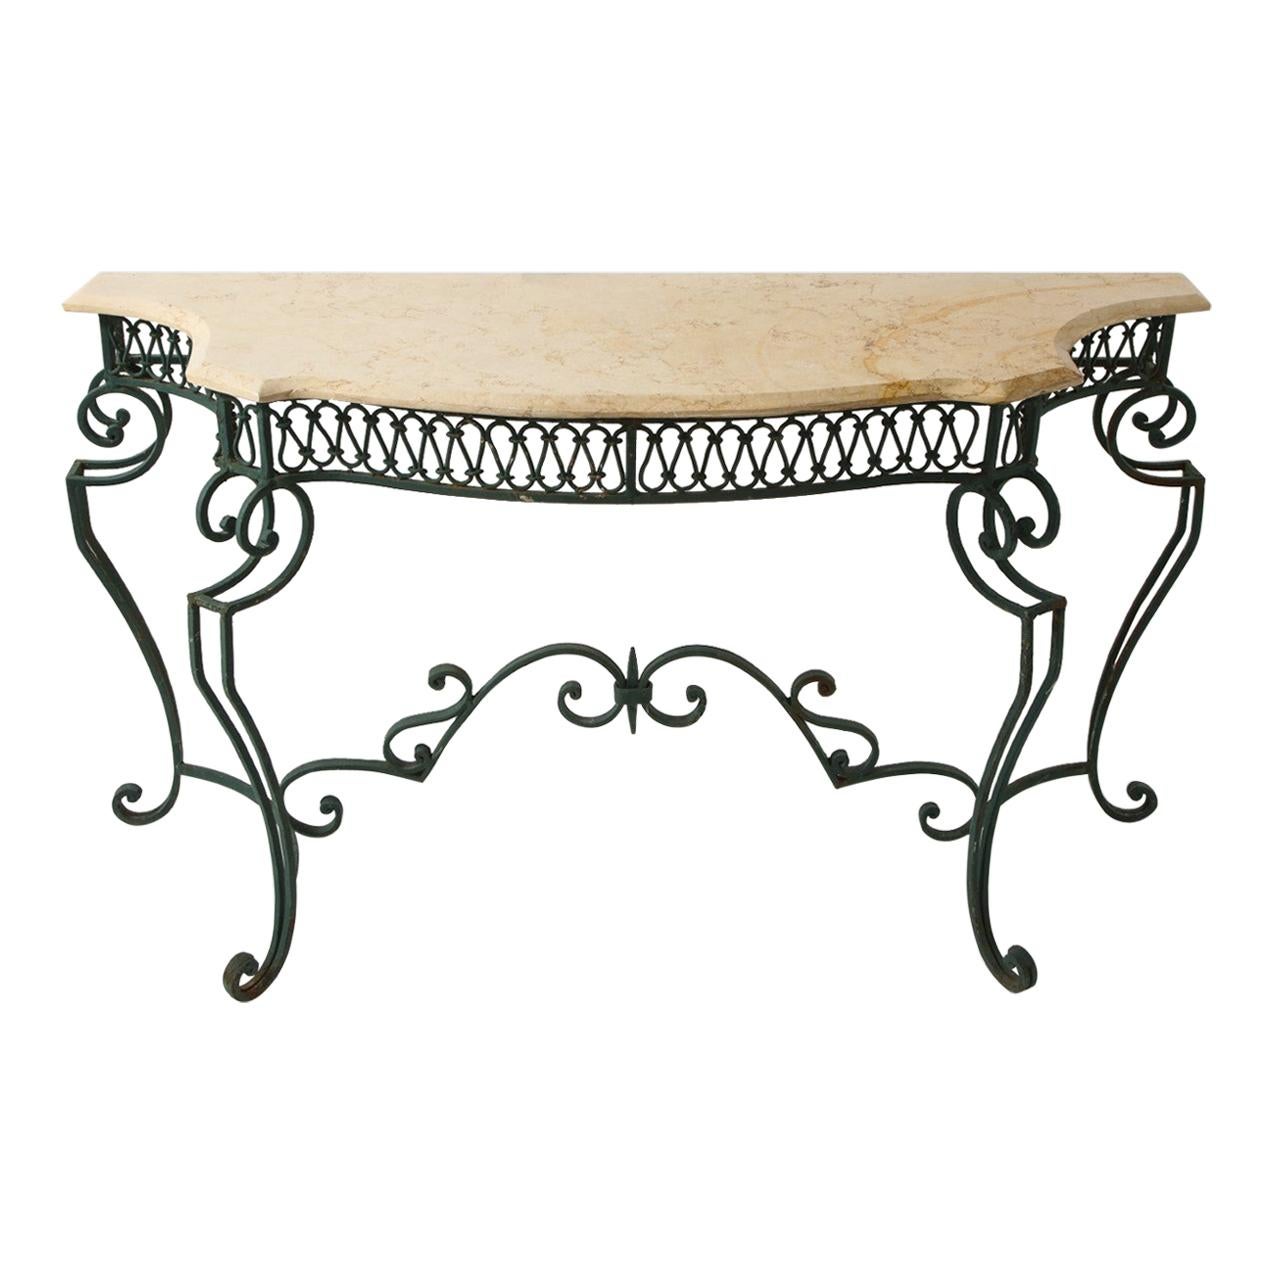 Midcentury French Marble & Iron Poillerat-Style Console Table